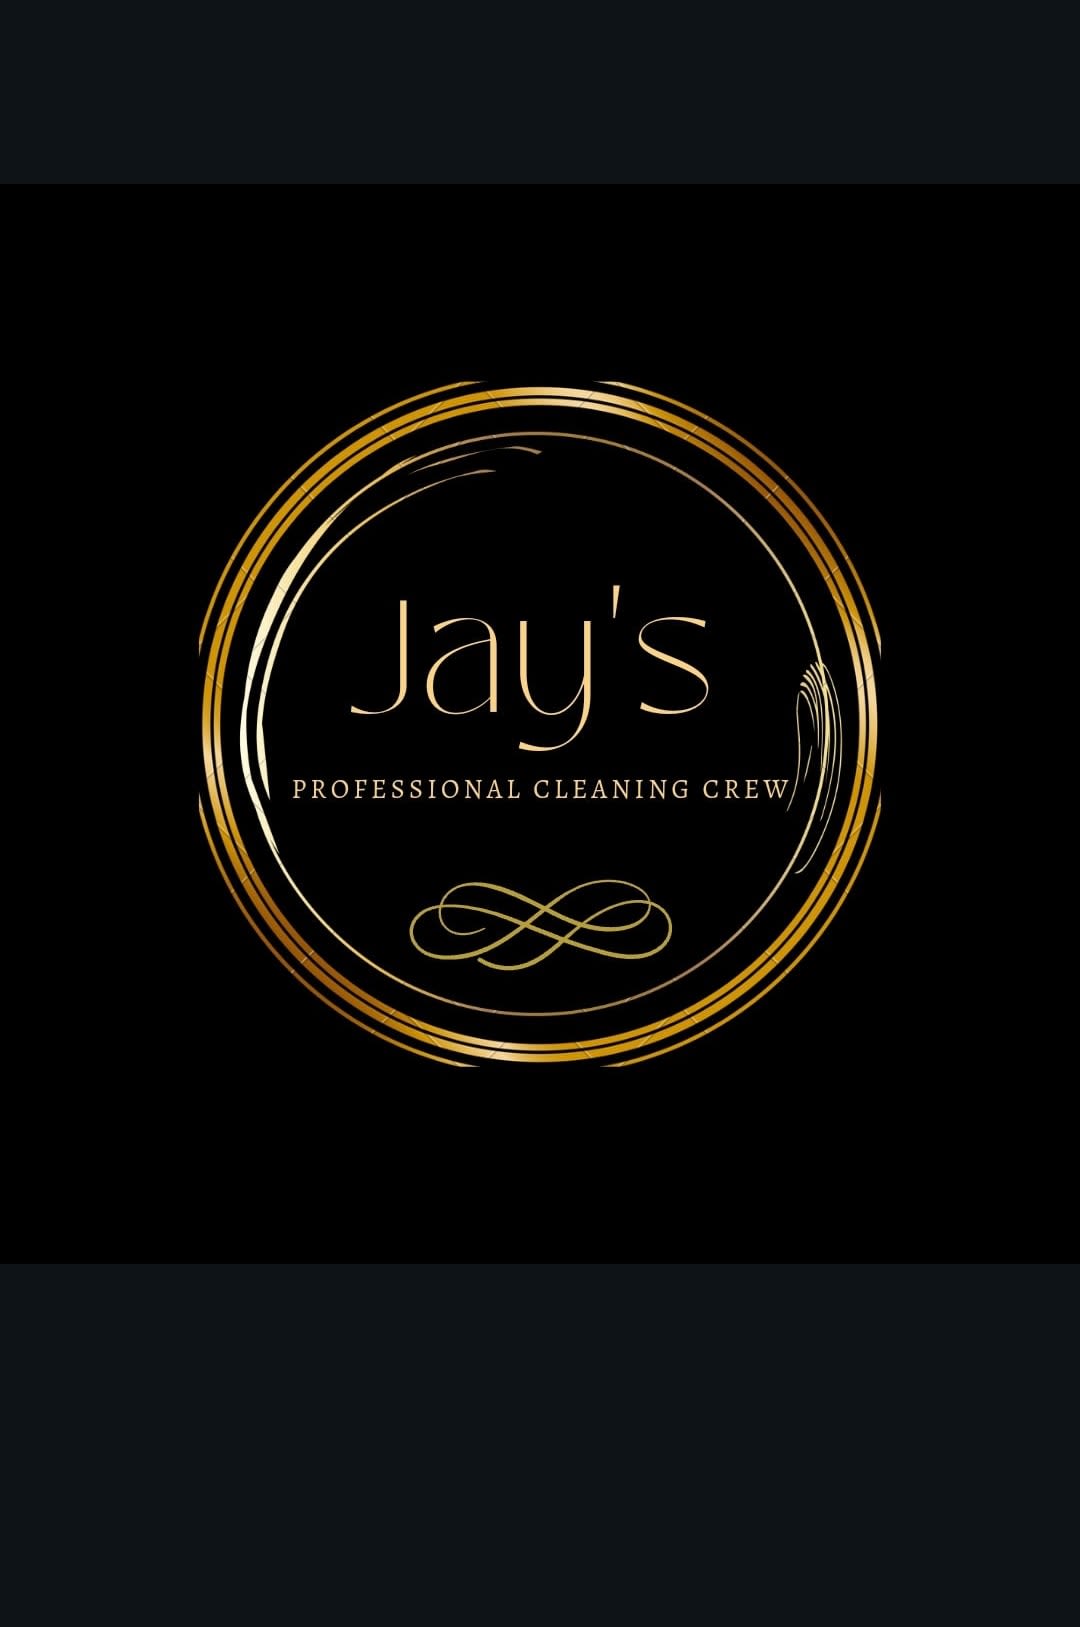 Jay's Professional Cleaning Crew